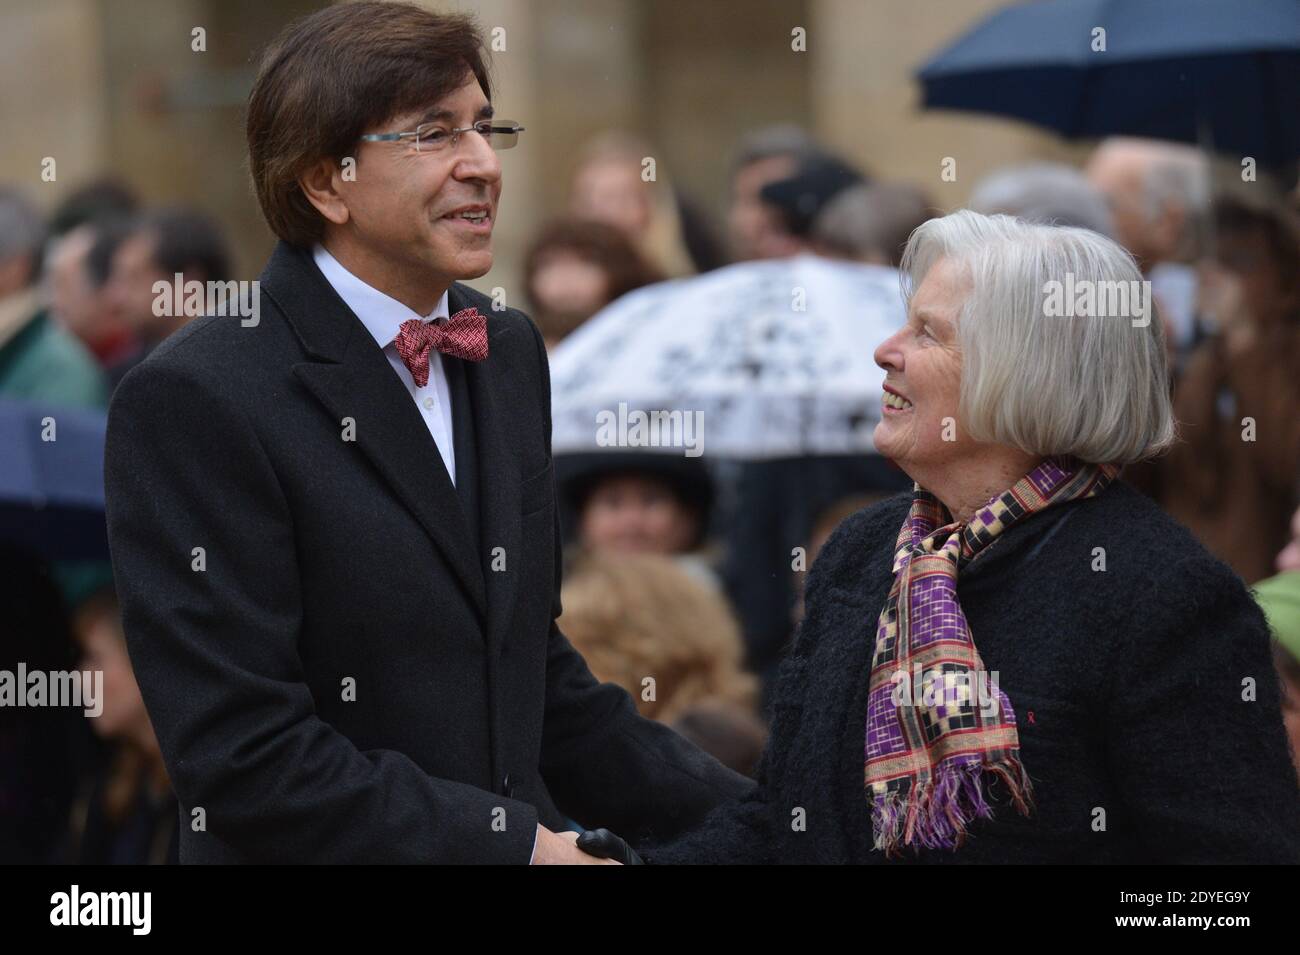 Belgium prime minister Elio Di Rupo and Christiane Hessel attending an national homage ceremony for Stephane Hessel, at Les Invalides in Paris, France on March 7, 2013. Hessel died on February 27, 2013 at age 95. He was a diplomat, ambassador, writer, concentration camp survivor and French Resistance member. In 2010, Hessel published his world-famous essay, 'Indignez-vous !' ('Time for Outrage!) which inspired protest movements in many countries. Photo by Christophe Guibbaud/ABACAPRESS.COM Stock Photo